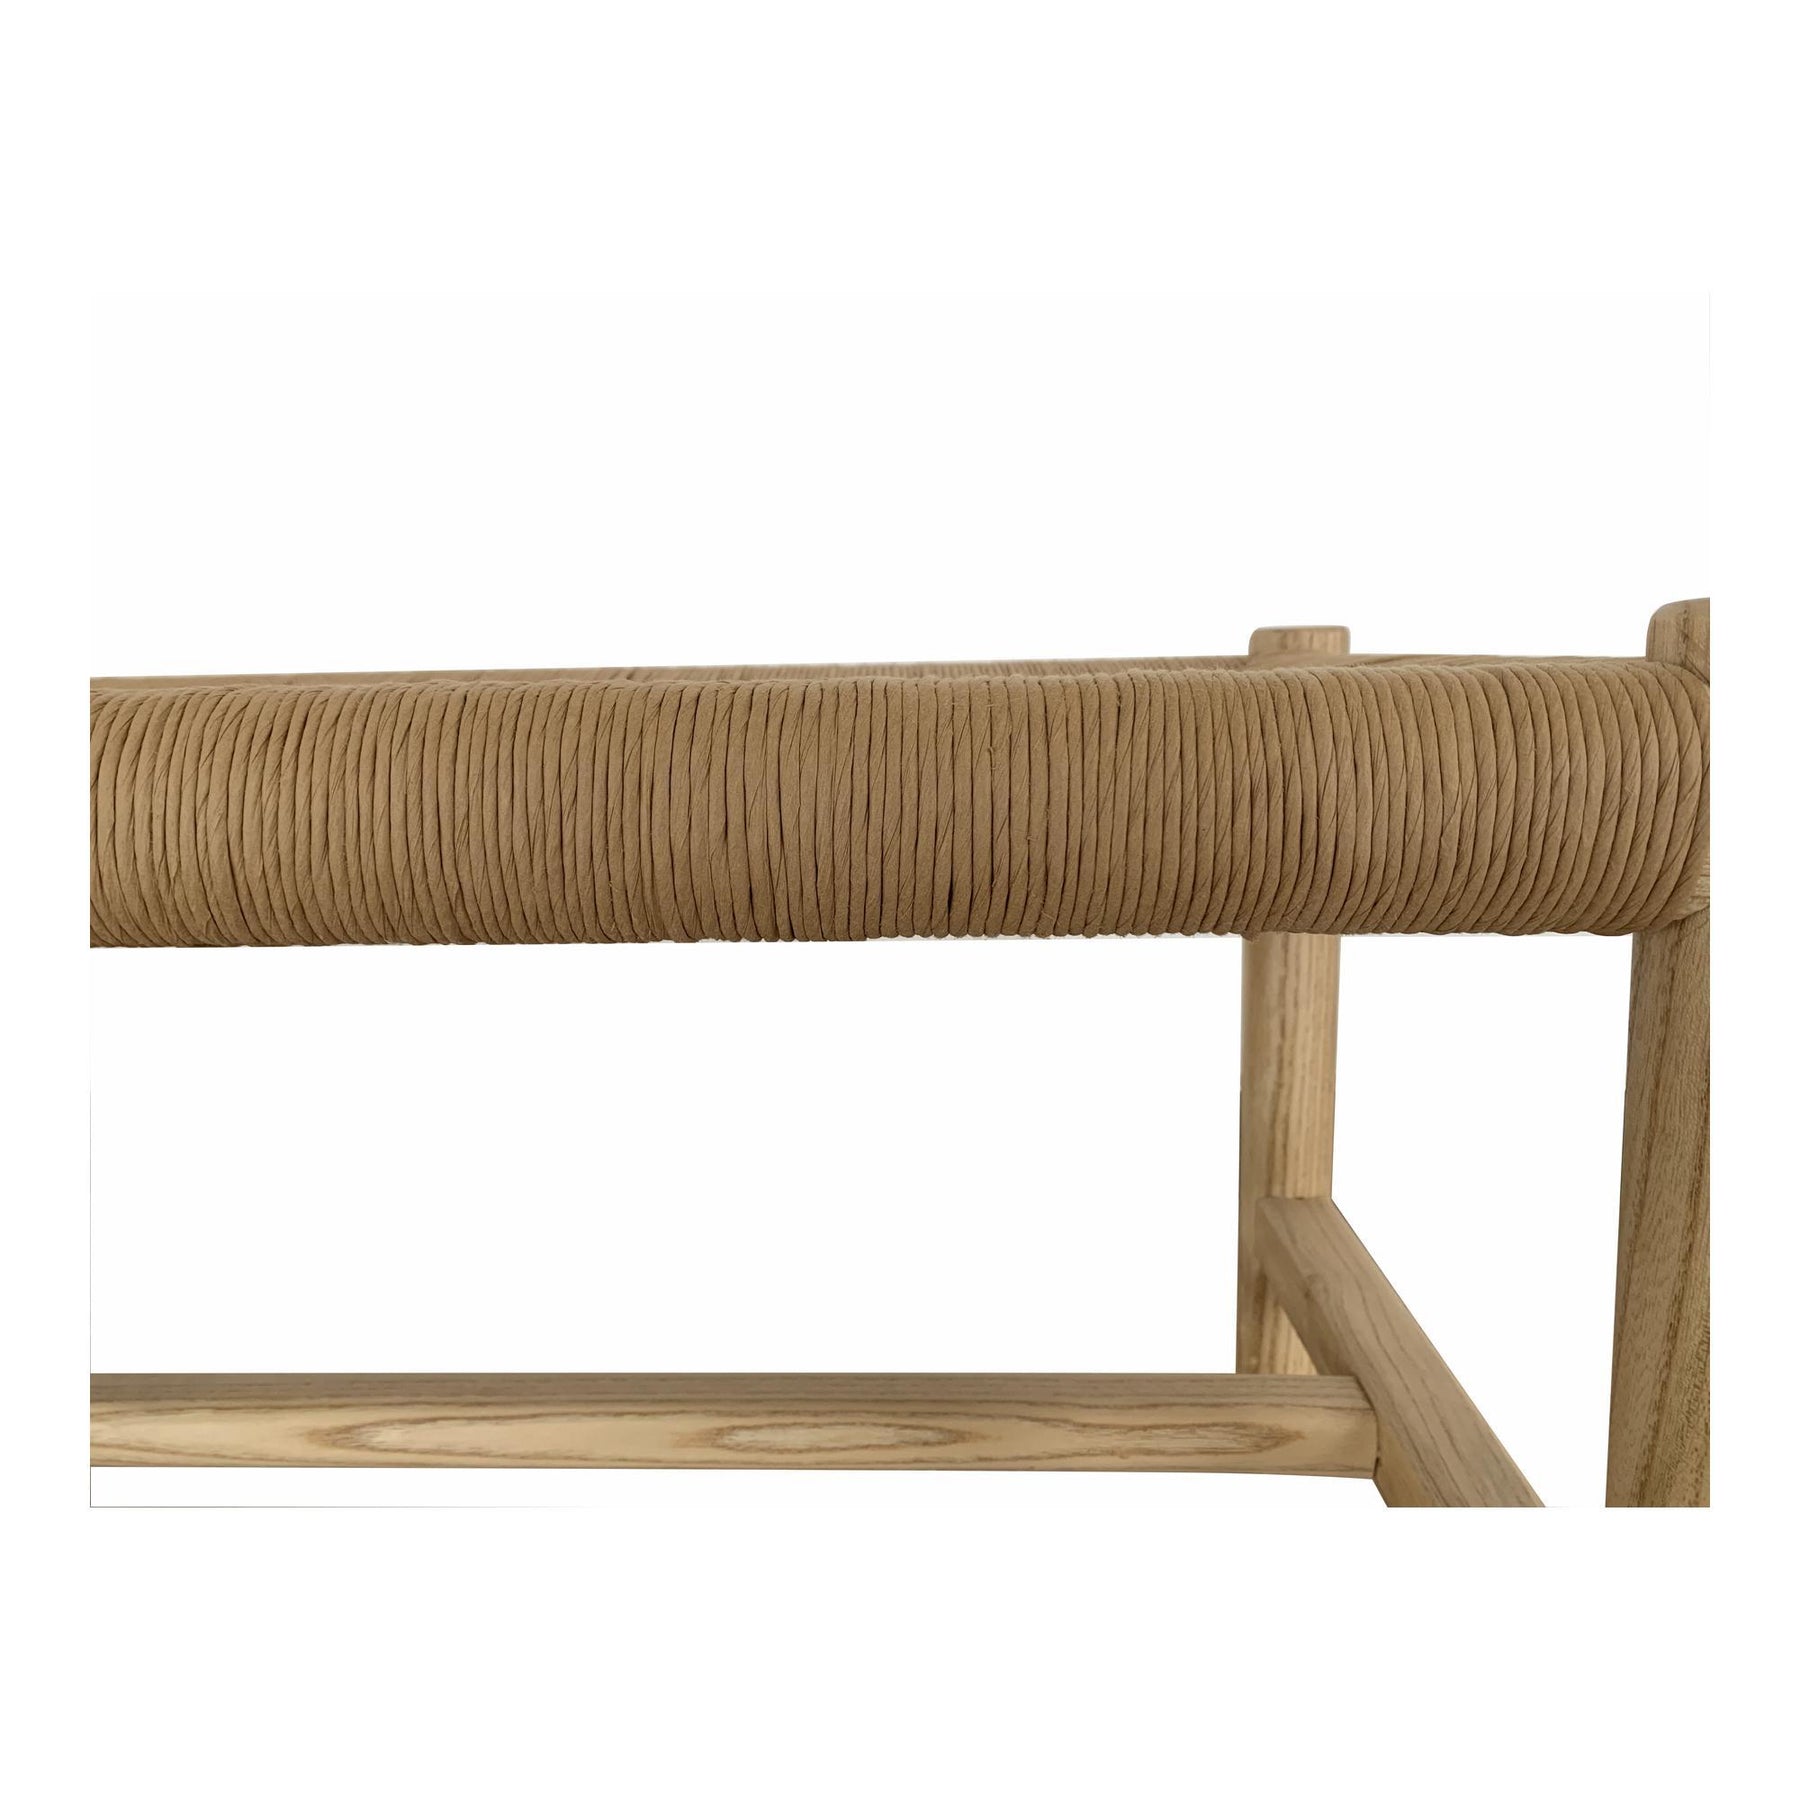 Moe's Home Collection Hawthorn Bench Large Natural - FG-1028-24